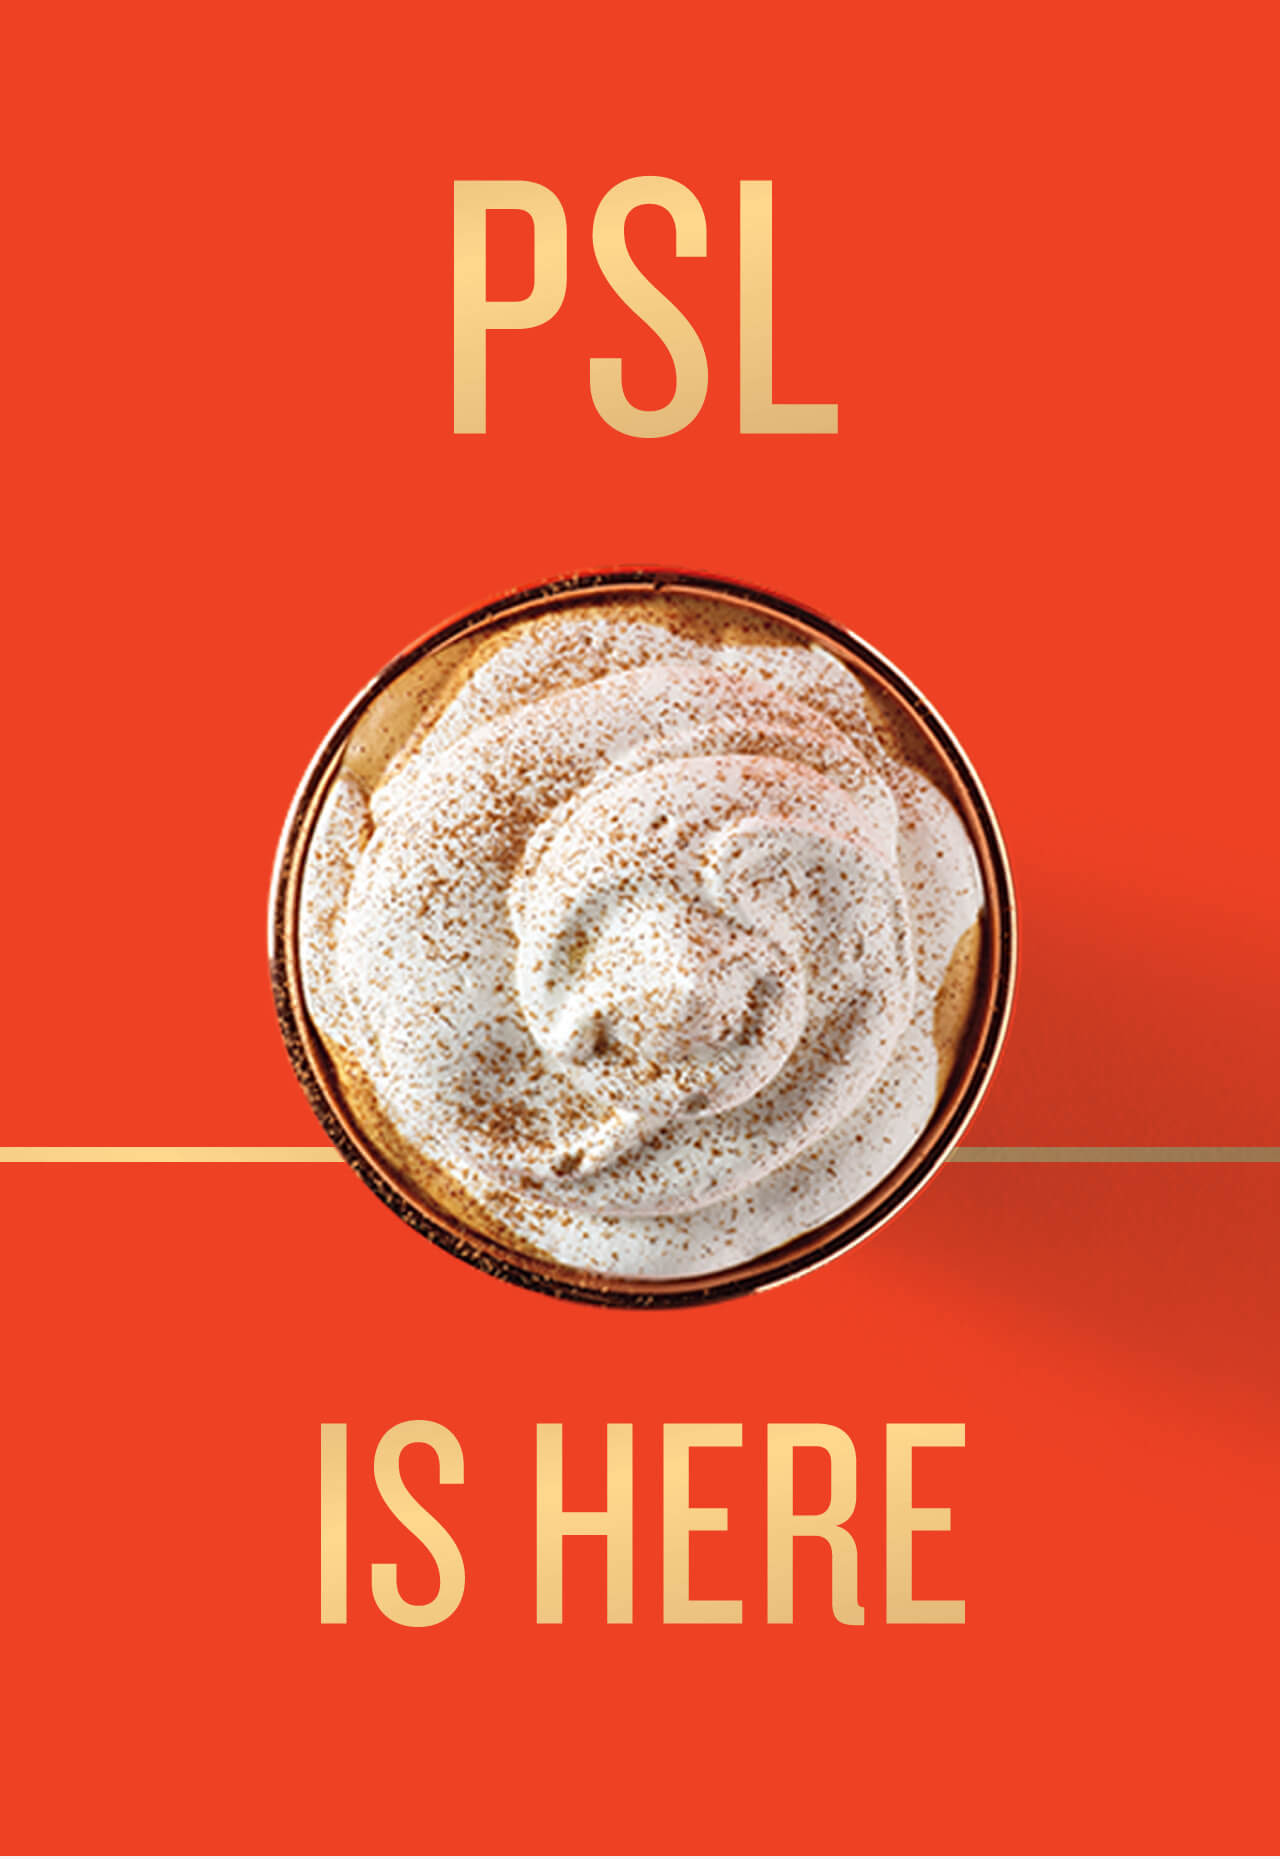 PSL is here